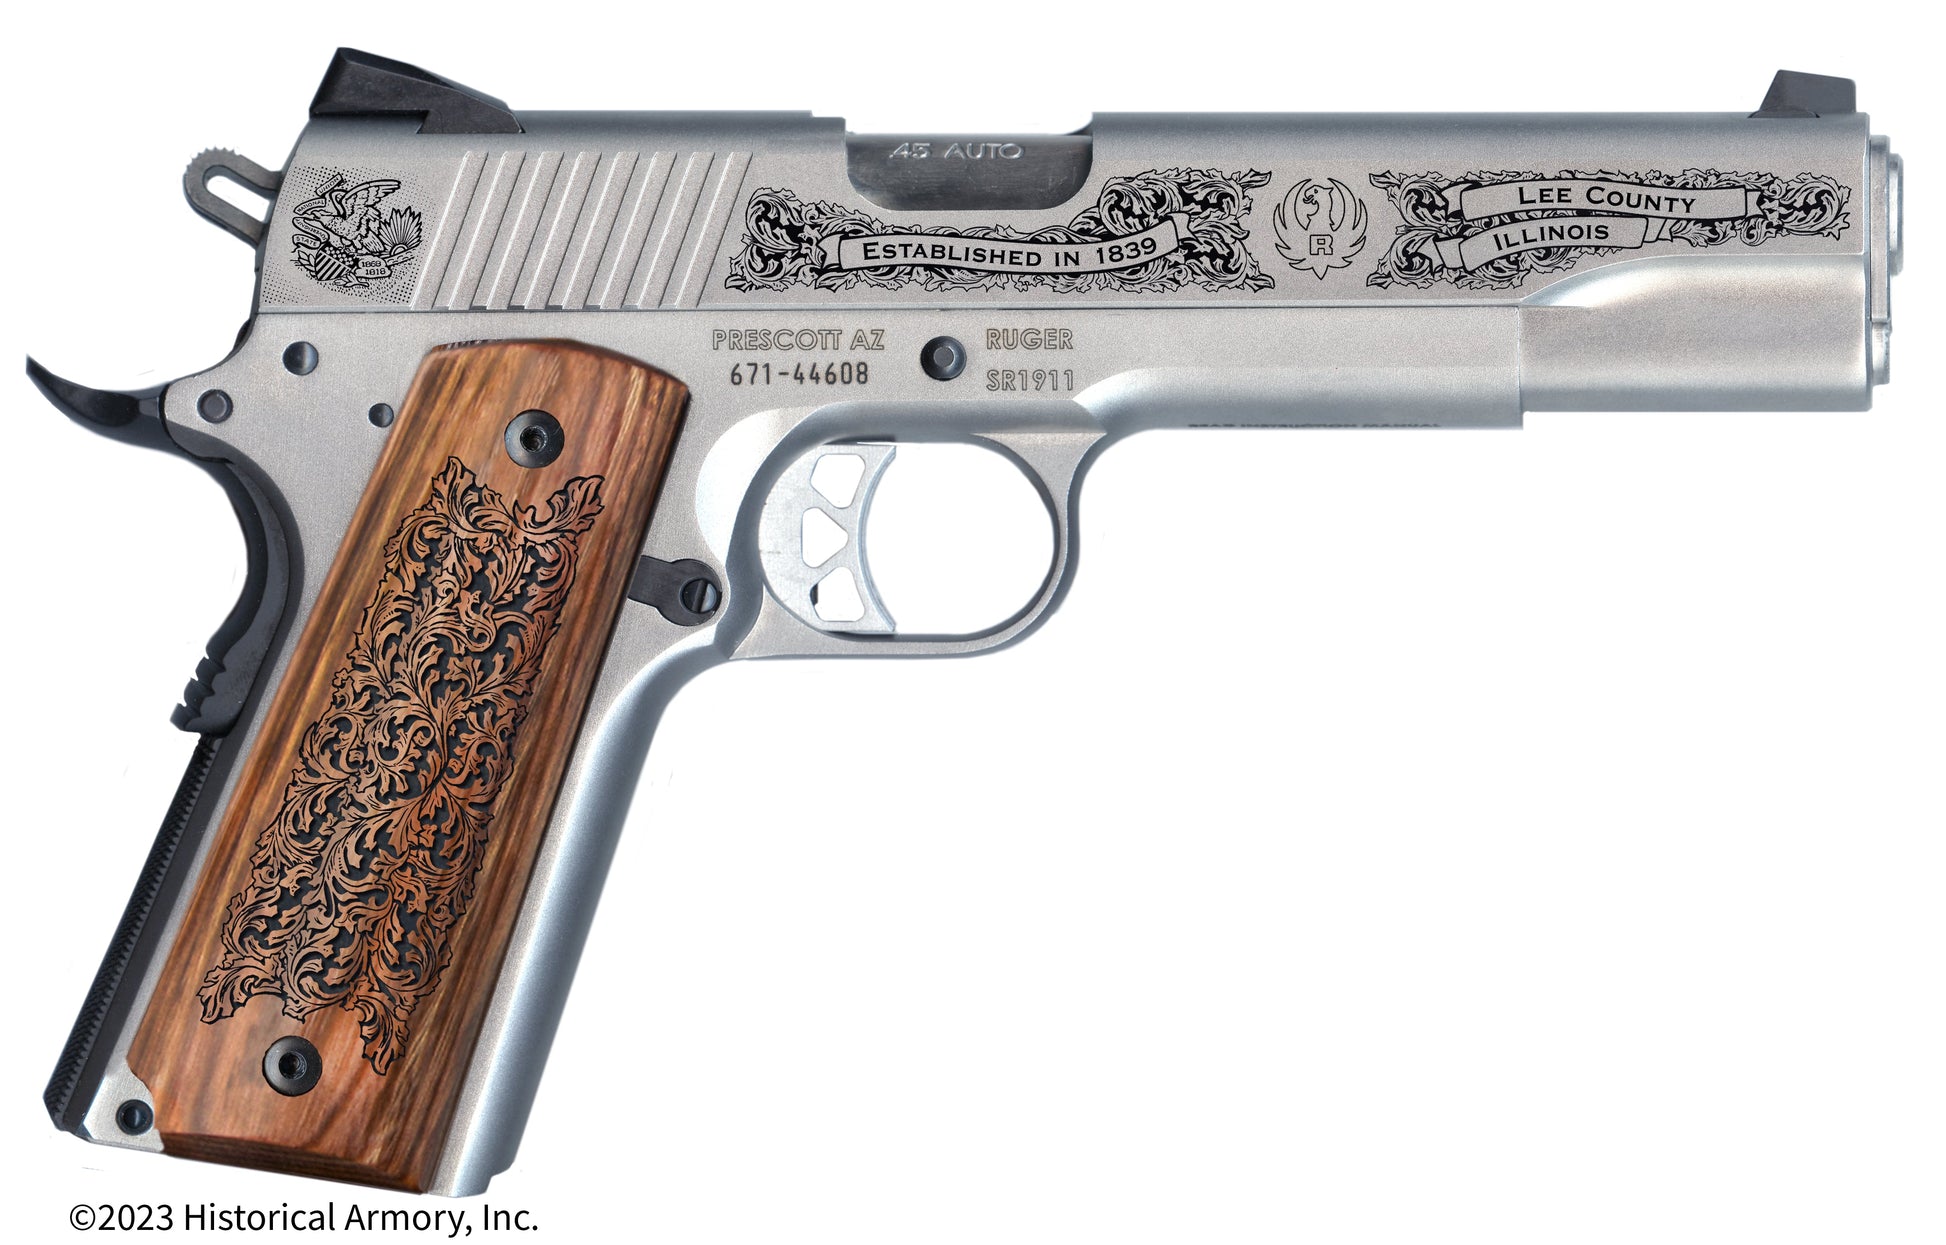 Lee County Illinois Engraved .45 Auto Ruger 1911